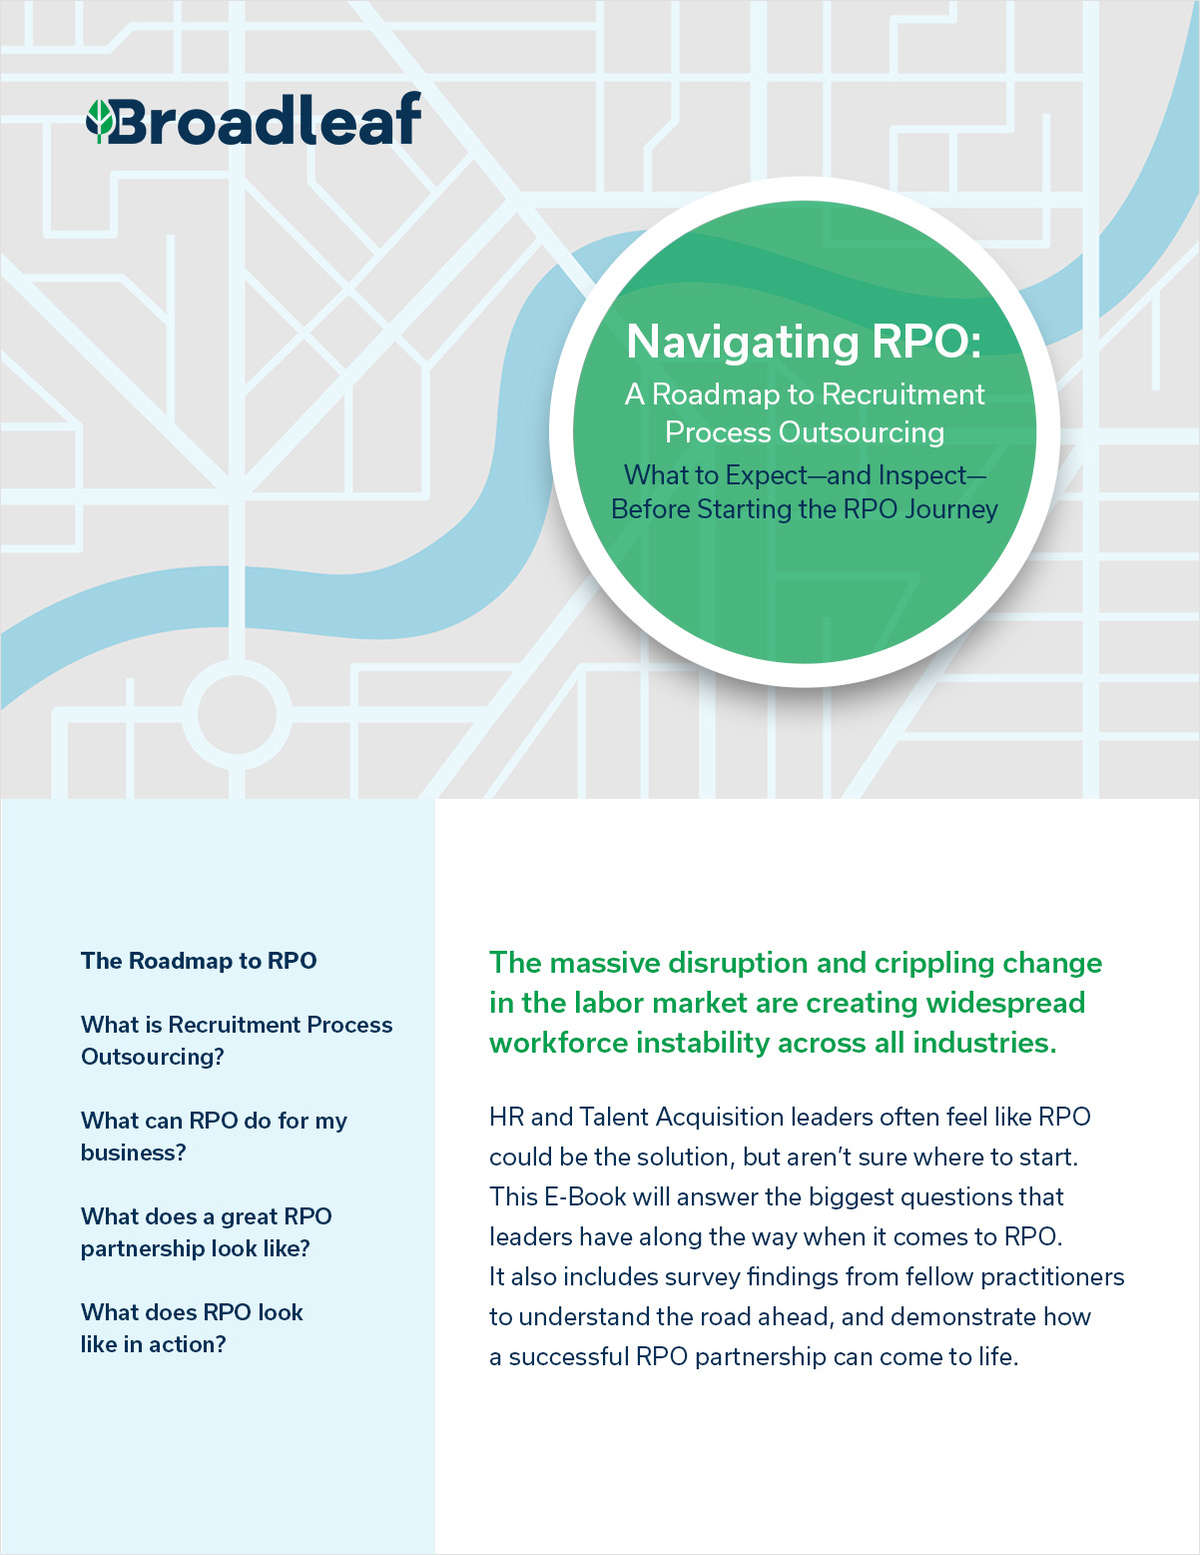 Navigating RPO: A Roadmap to Recruitment Process Outsourcing